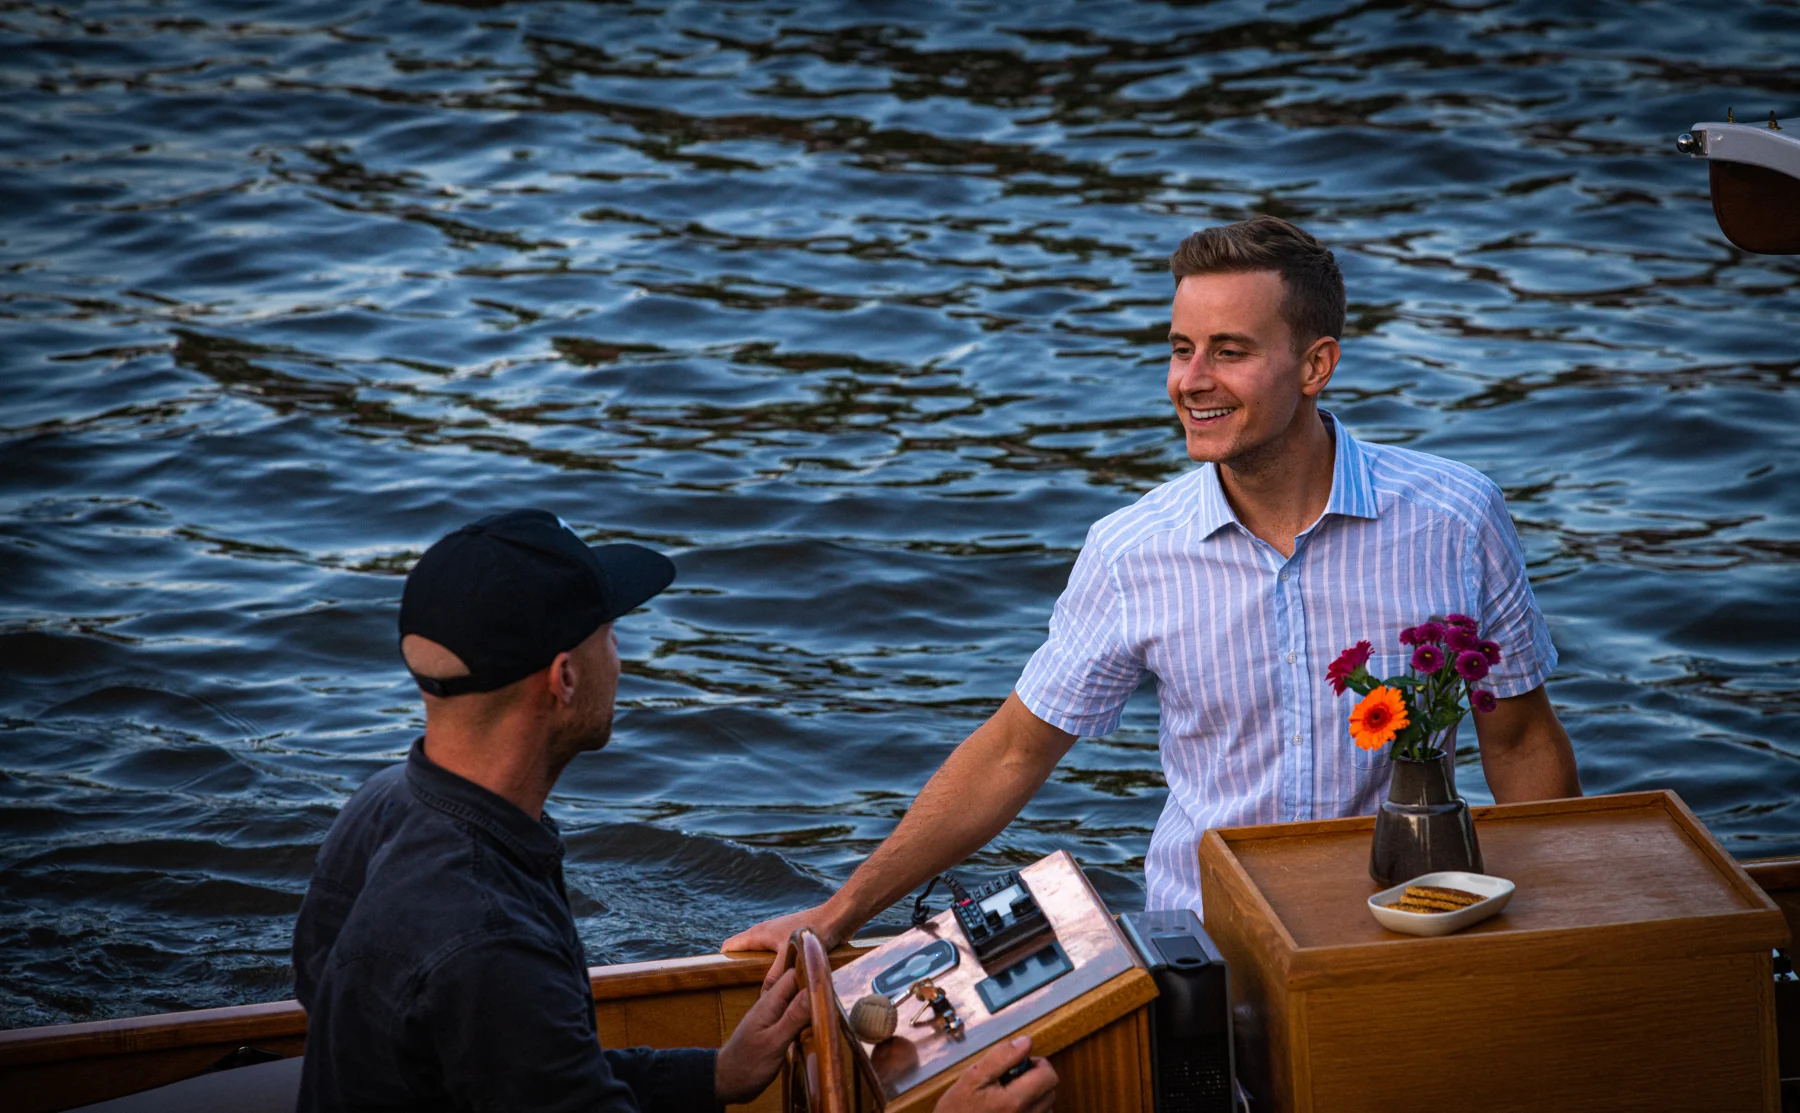 Private Boat Tour Amsterdam with wine and cheese! - 1284827